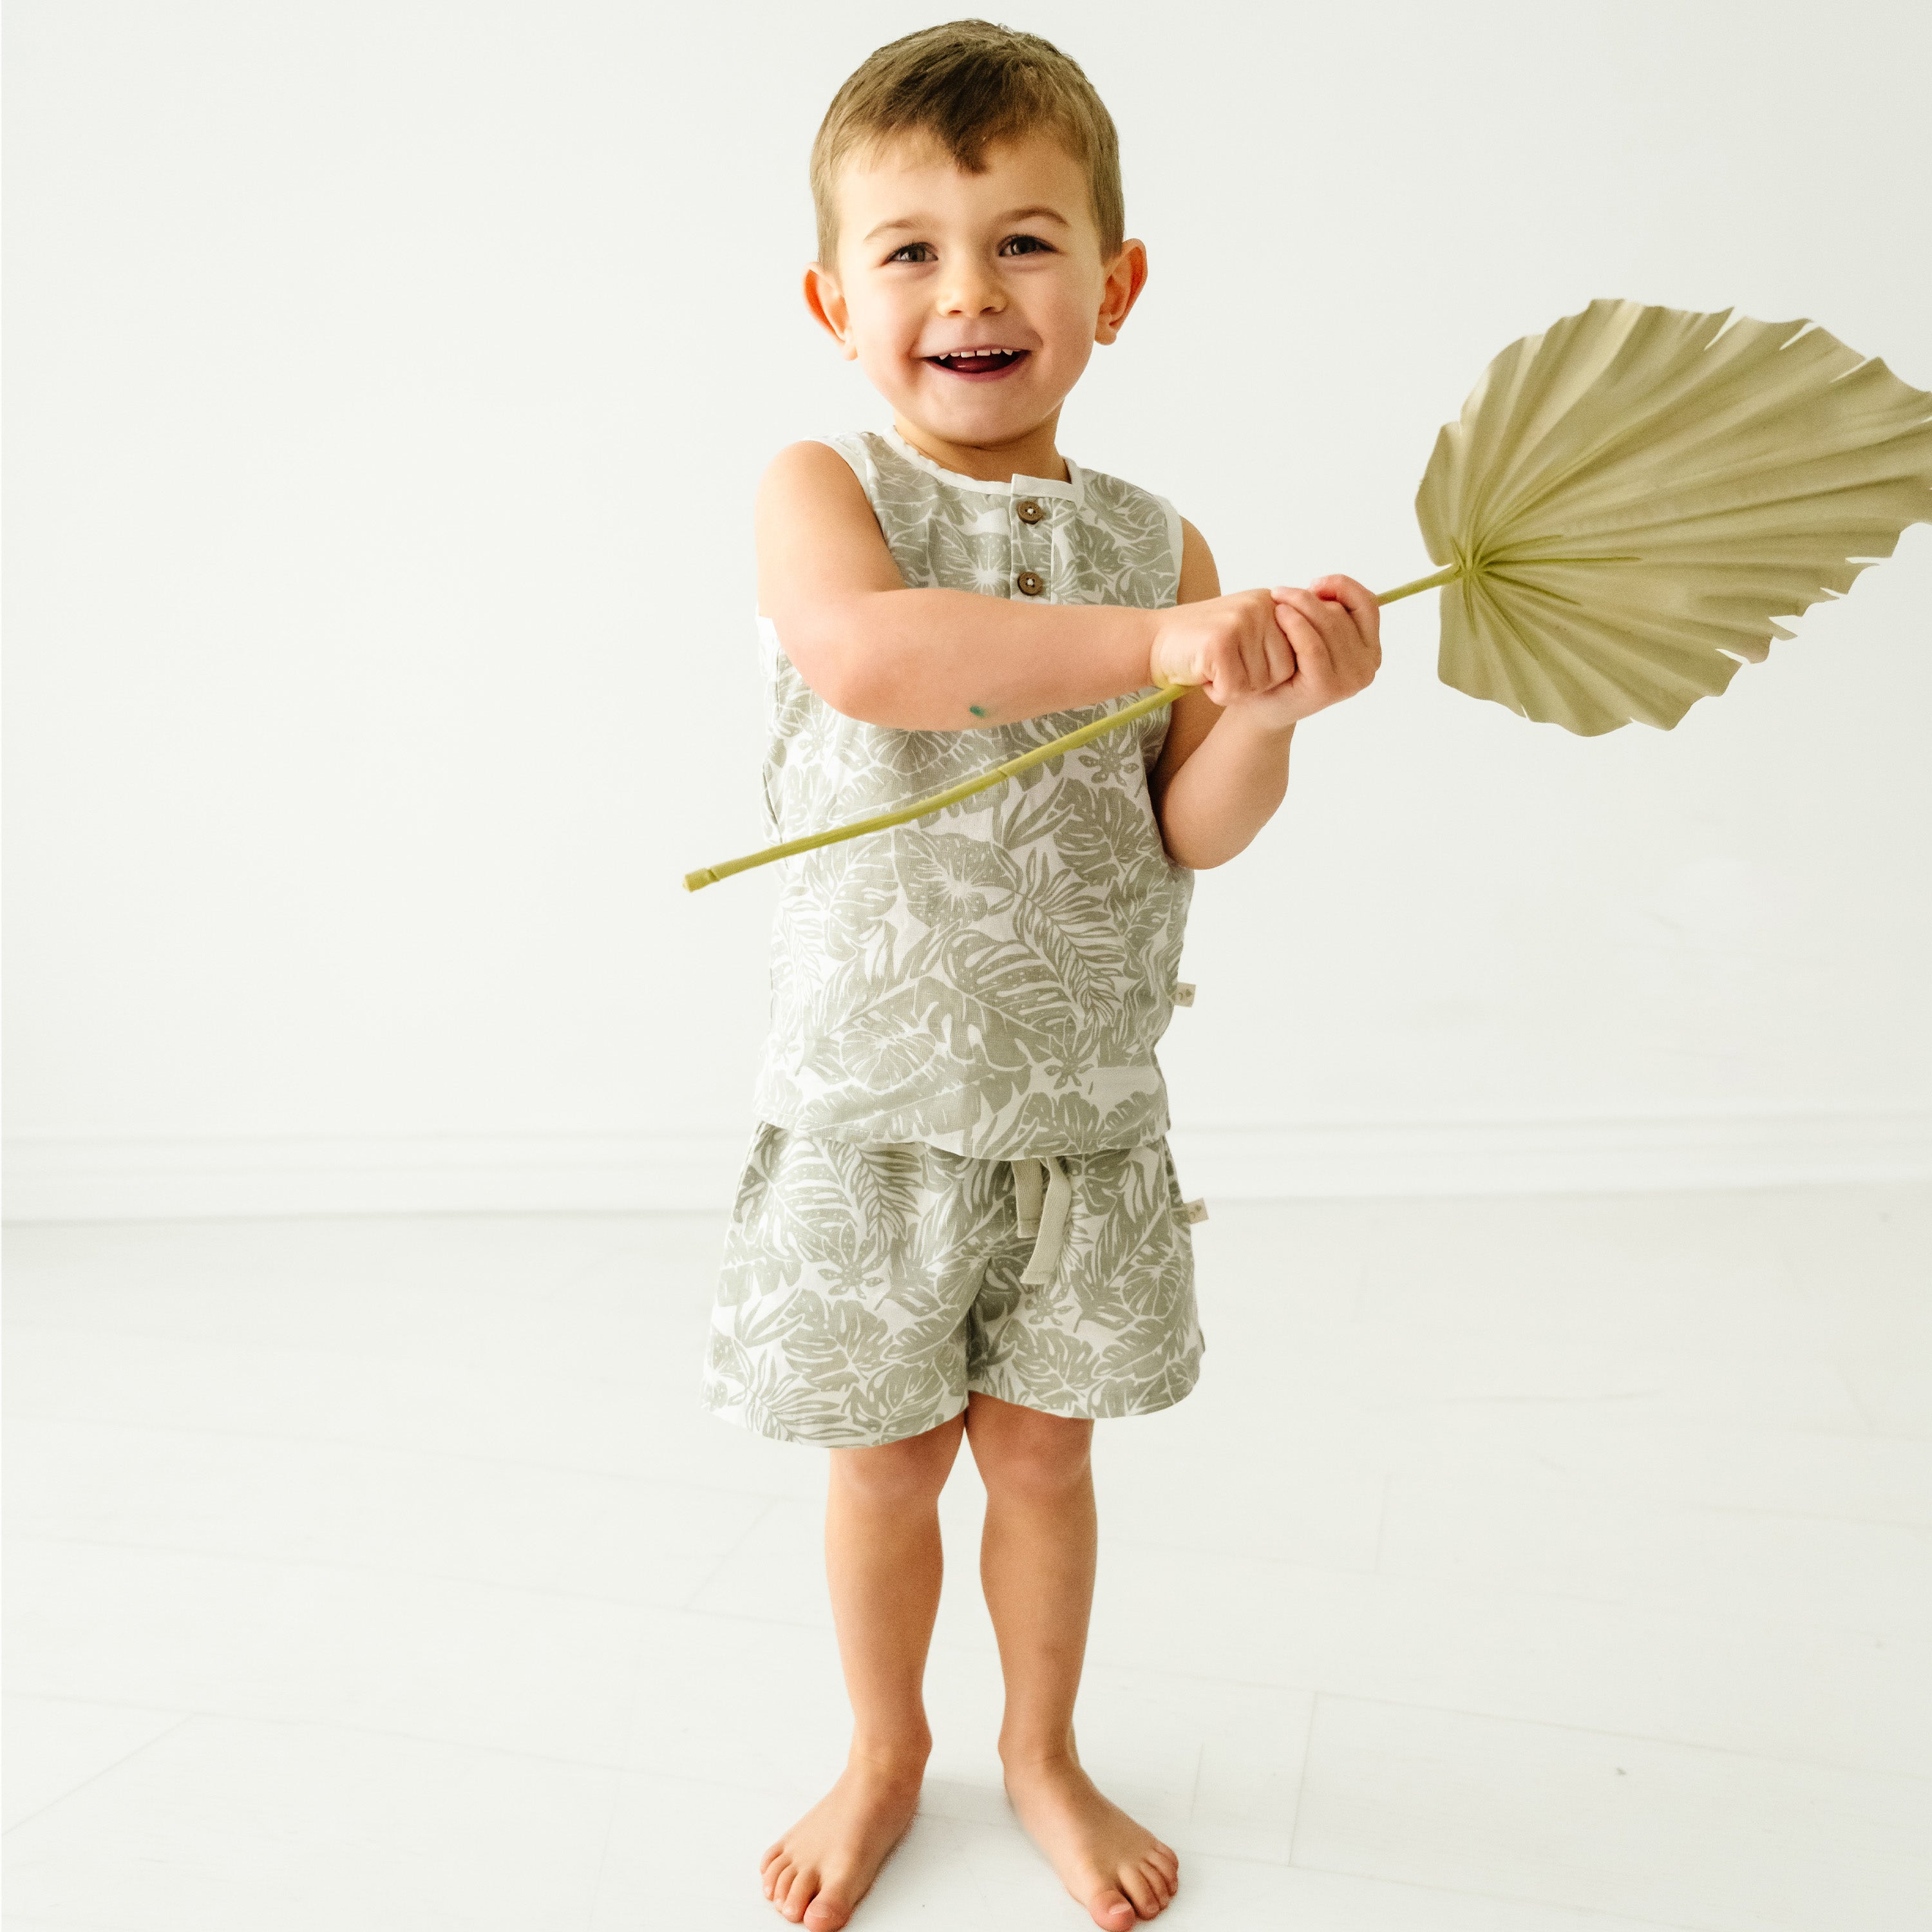 A cheerful young girl in a Makemake Organics Organic Linen Tank and Shorts Set - Palms smiles widely, holding a large palm leaf against a plain white background.